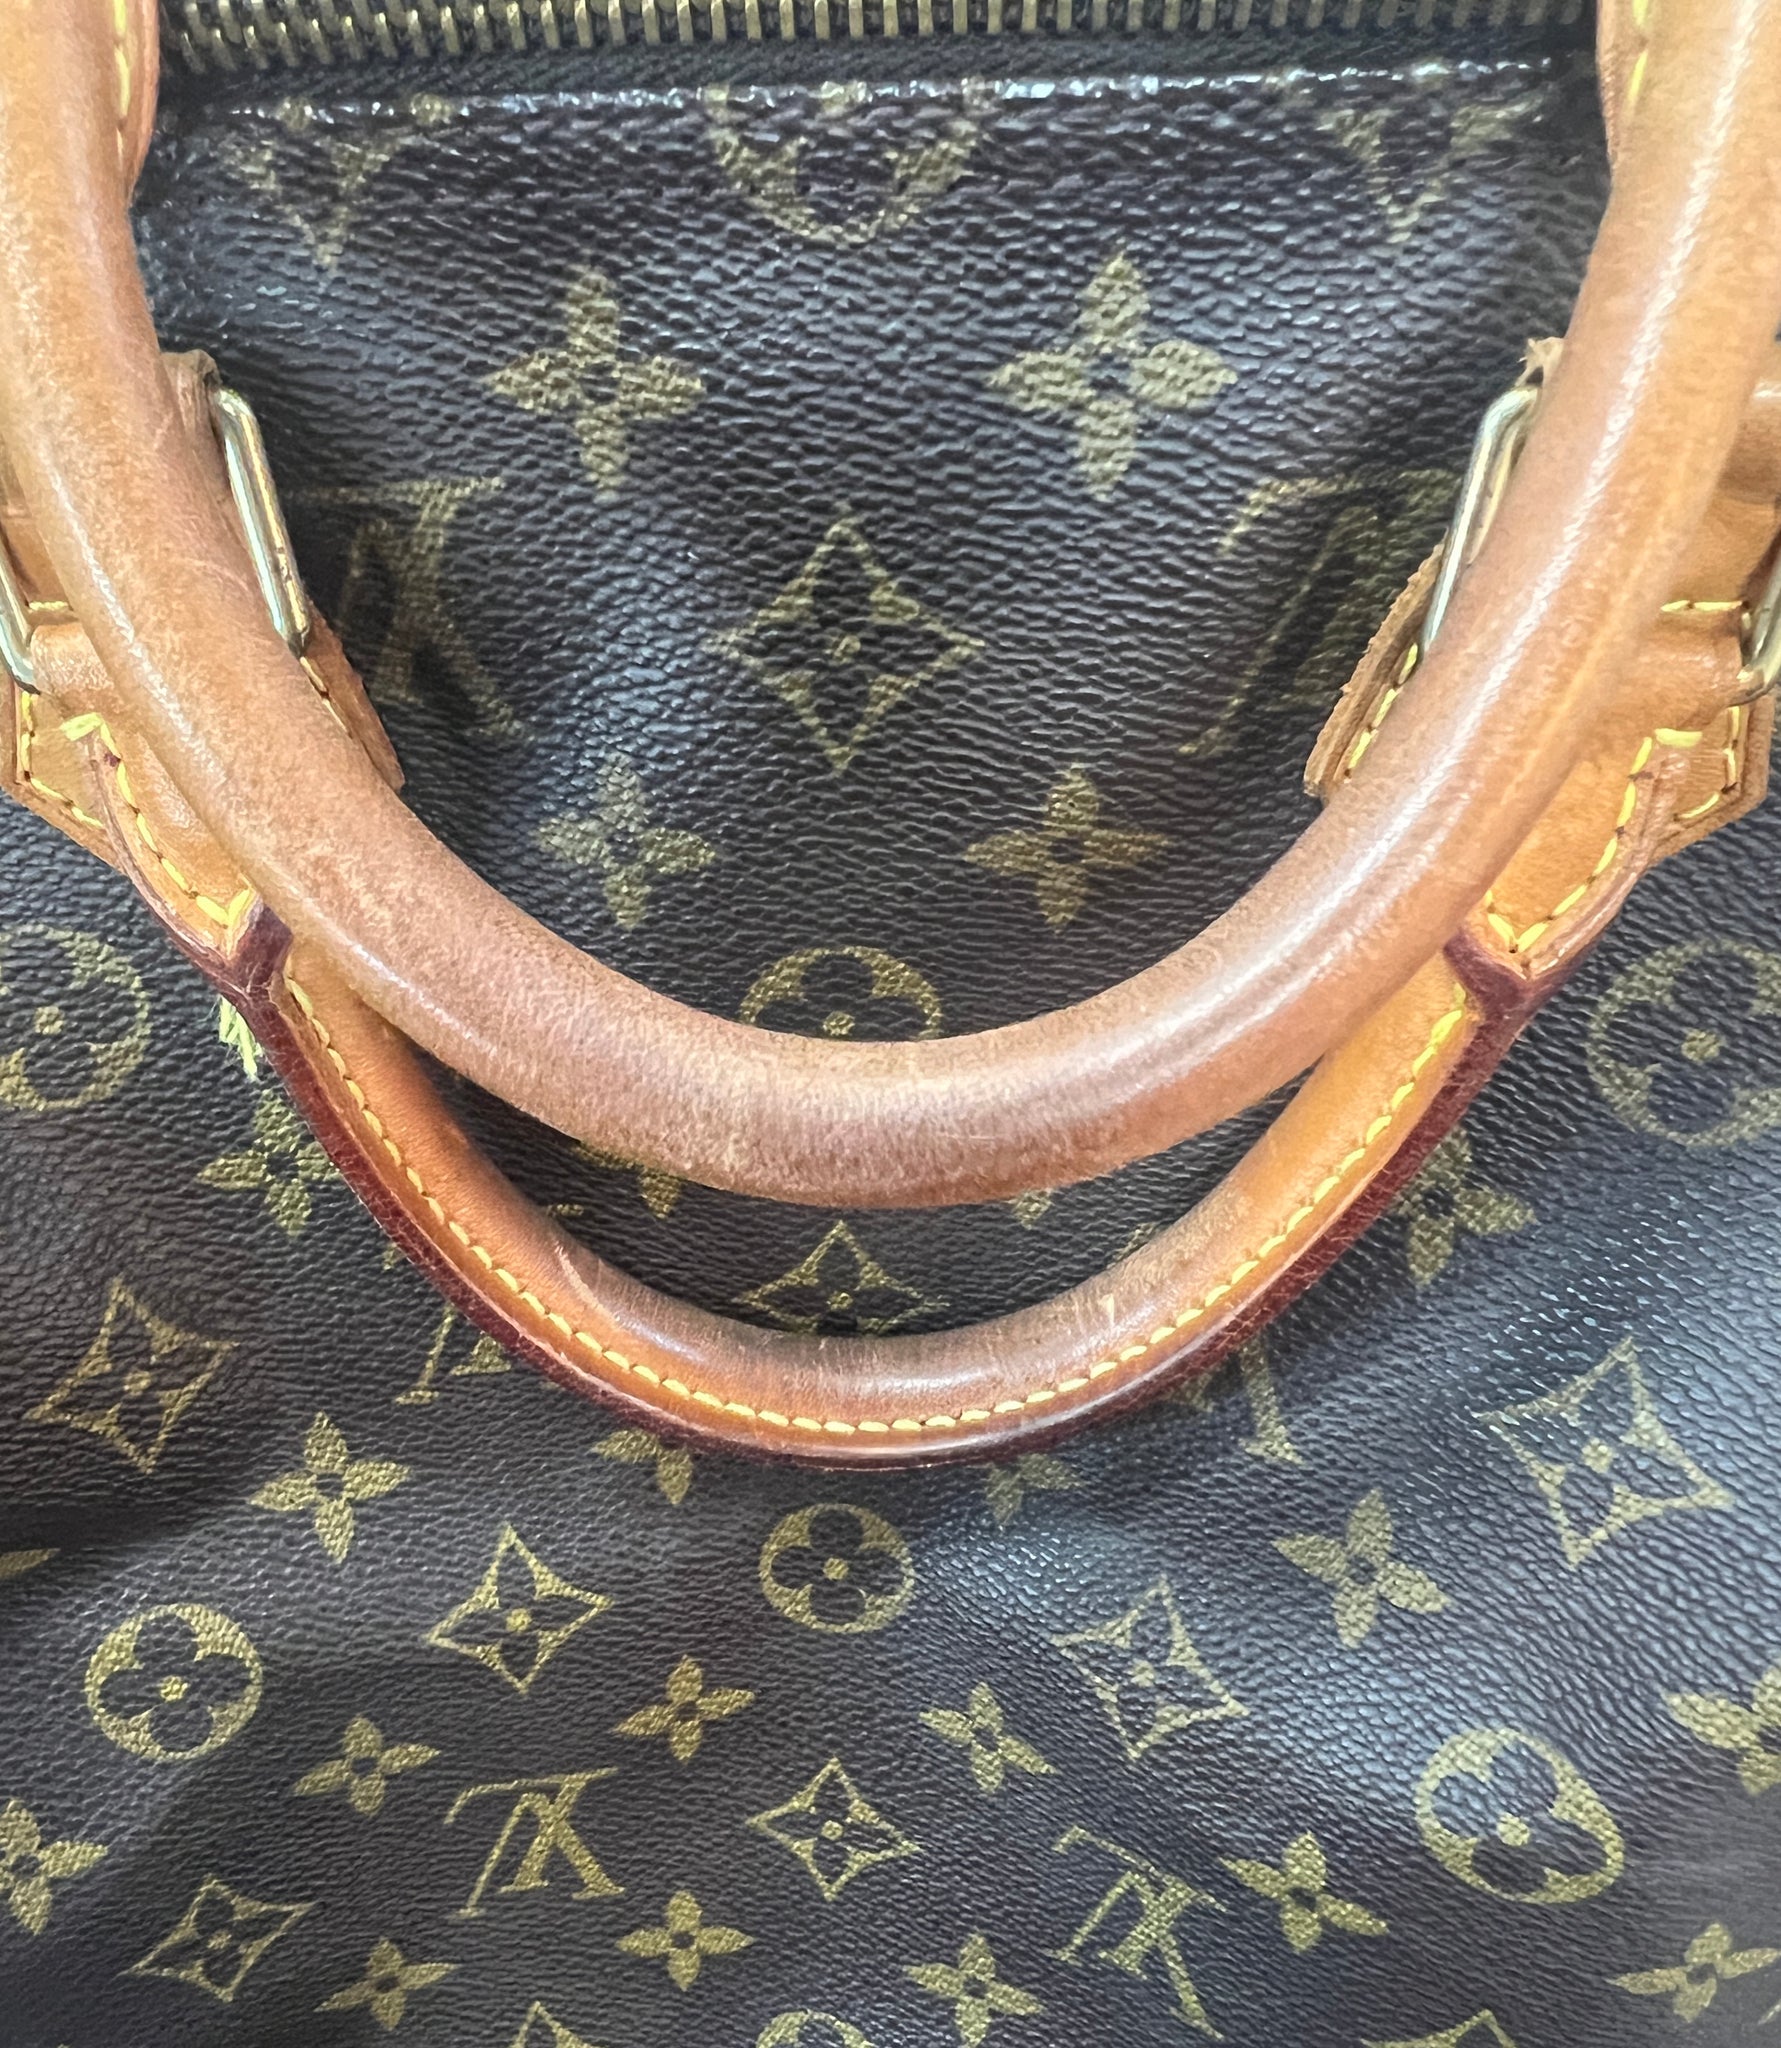 Vintage Louis Vuitton Speedy bags - Our authenticated second-hand